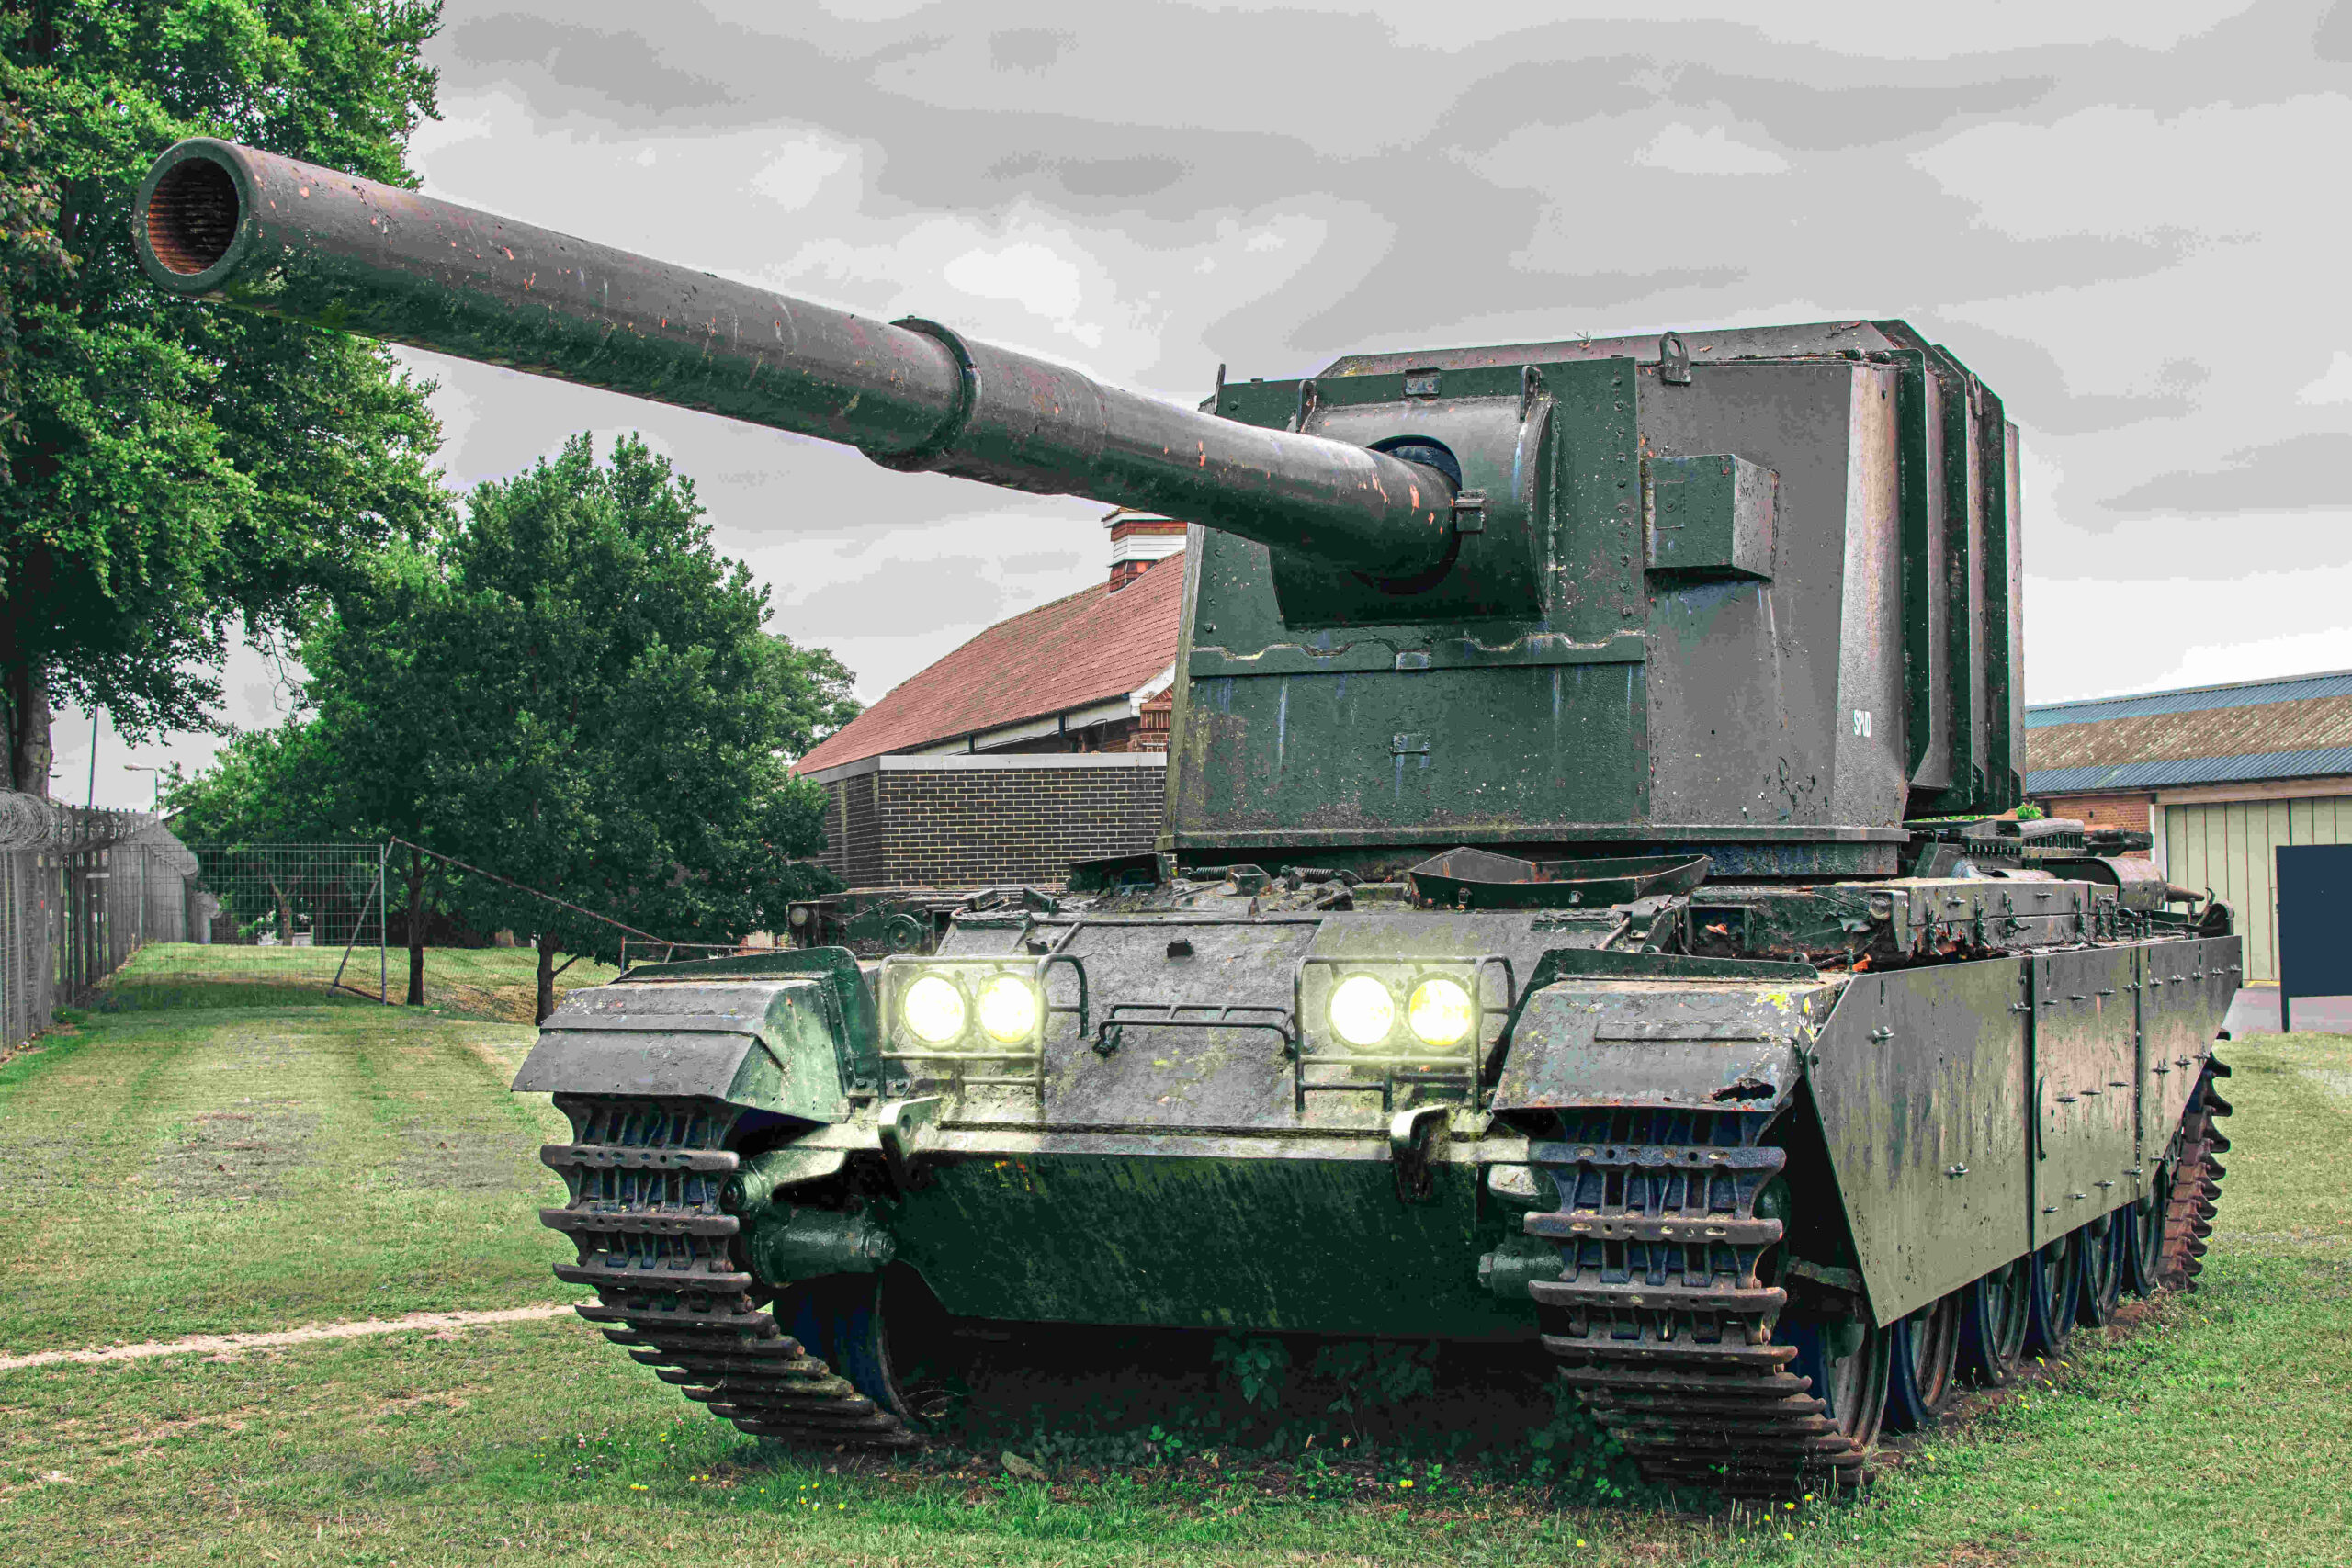 The Insane FV4005 - 183 mm of Ridiculousness - Tank Historia